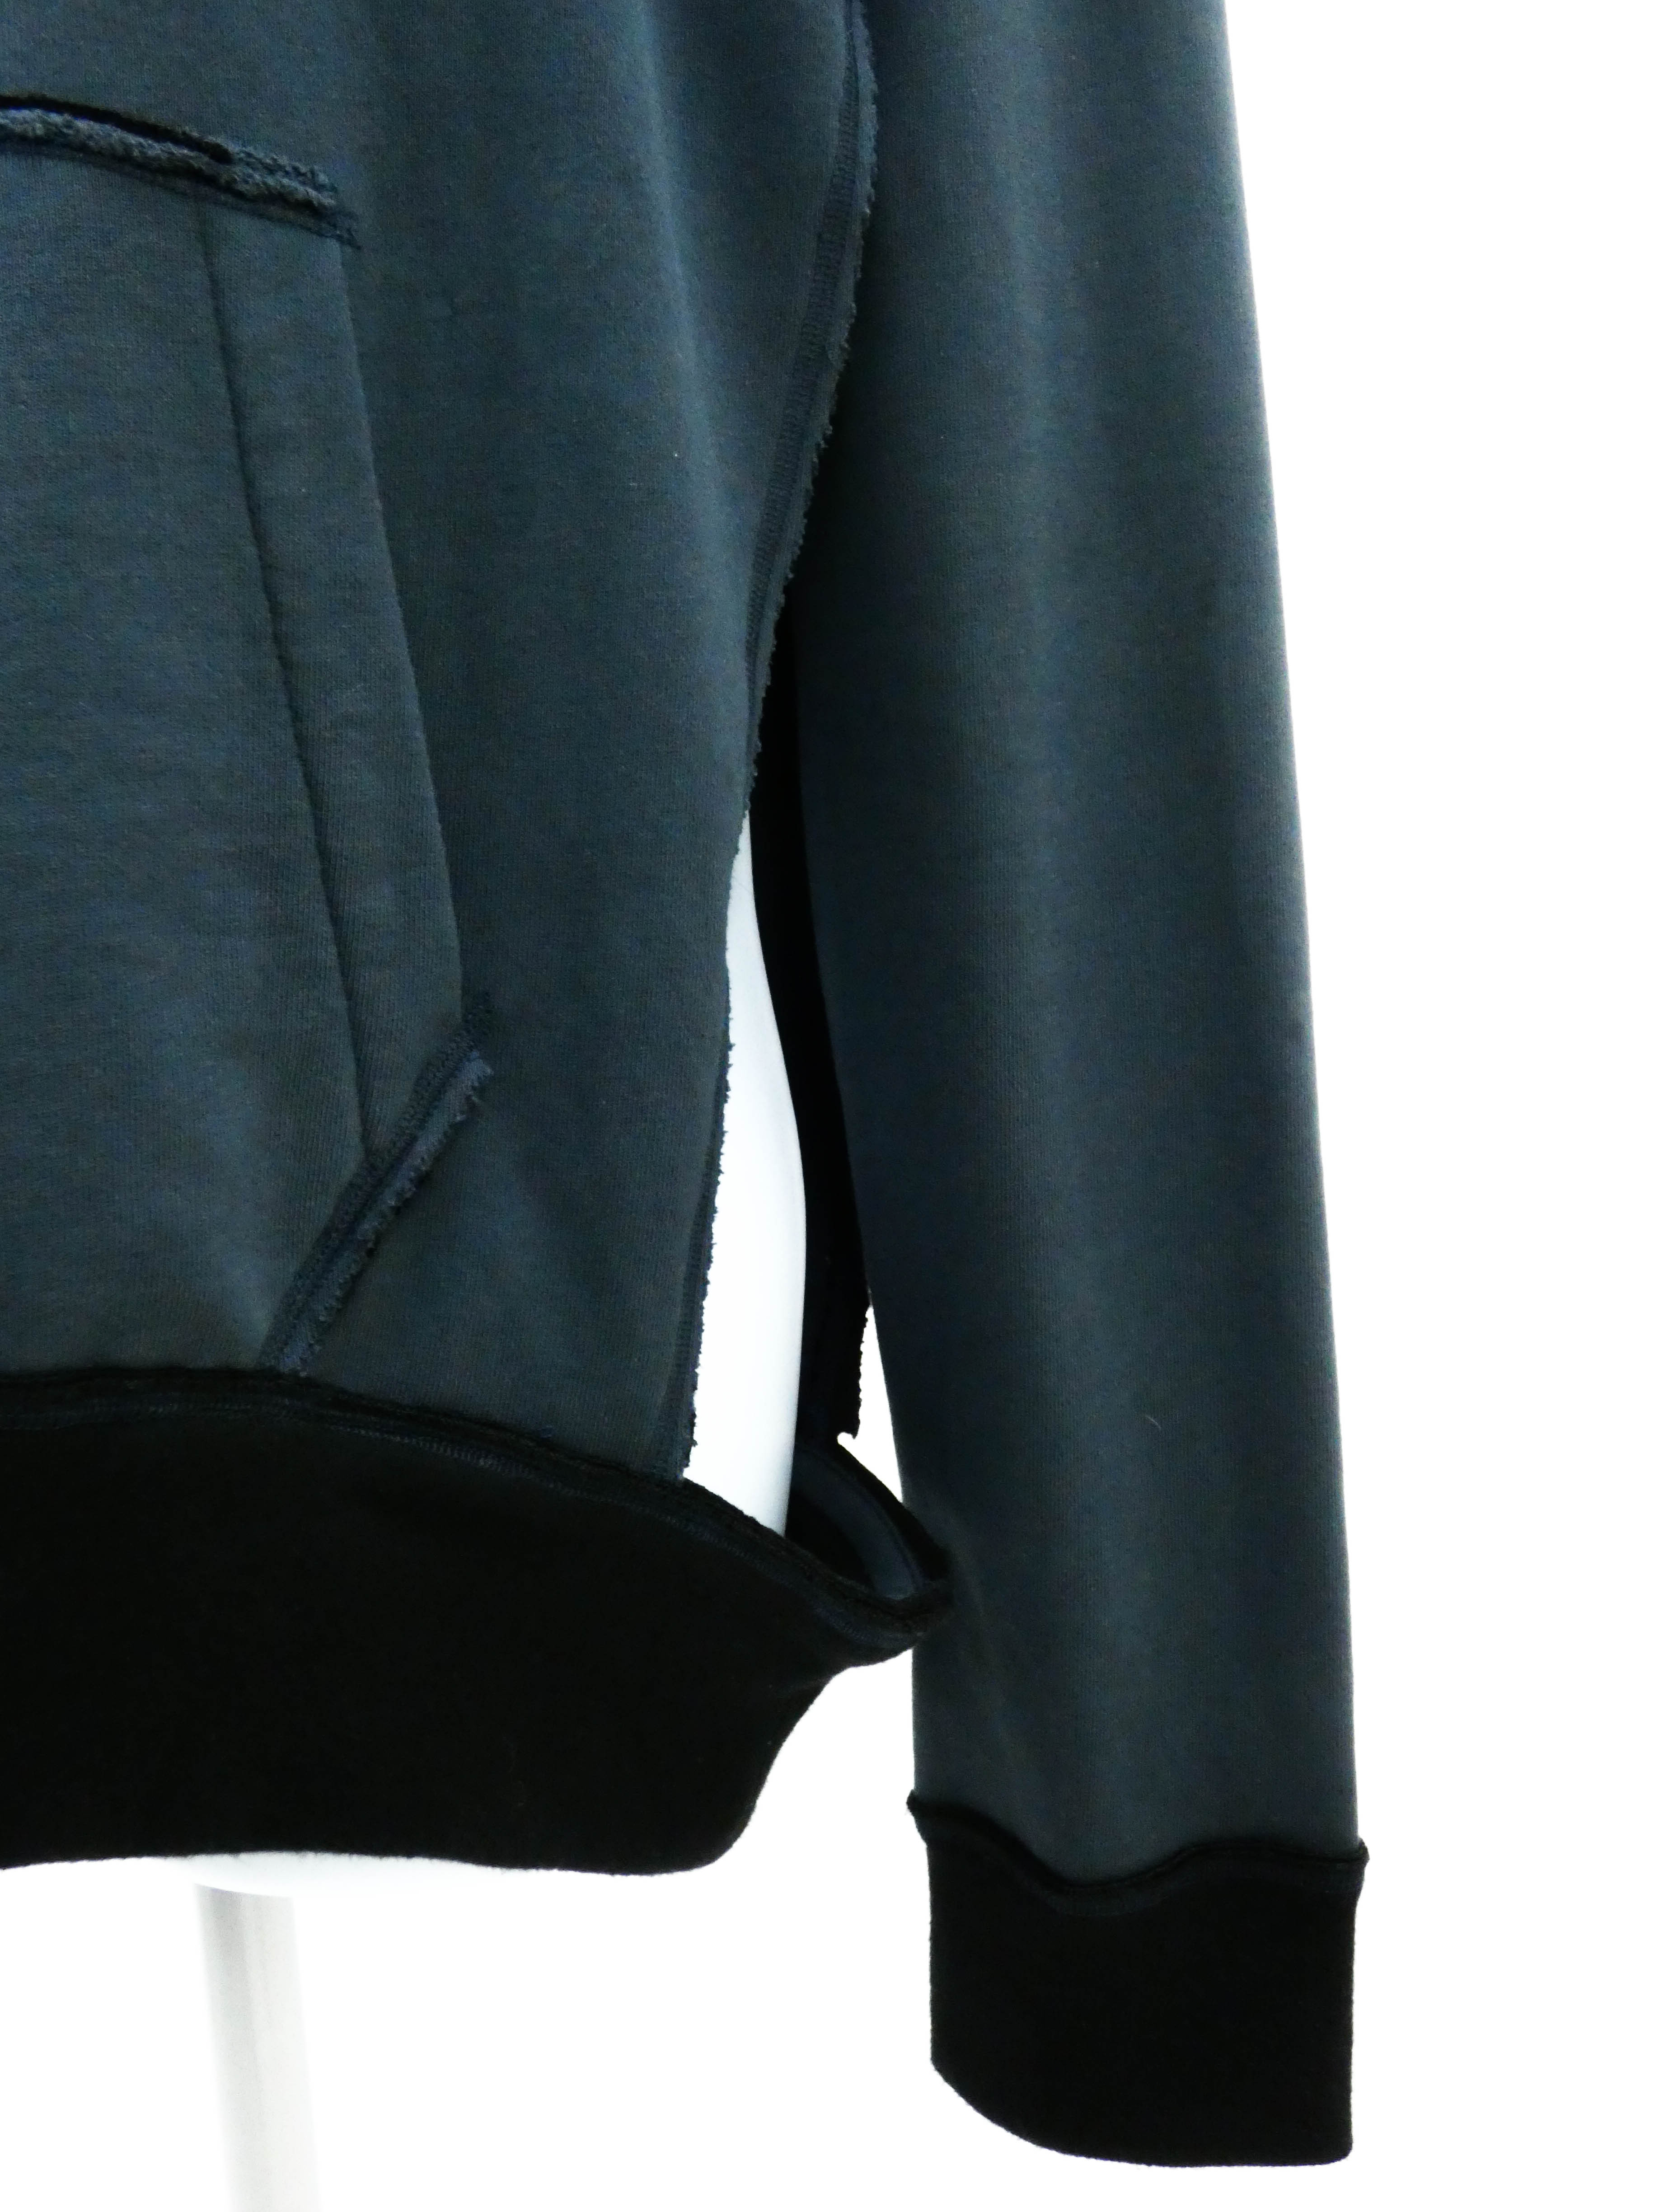 BLUE/GREY COTTON HOODED SWEATSHIRT WITH CUT OUT DETAILING